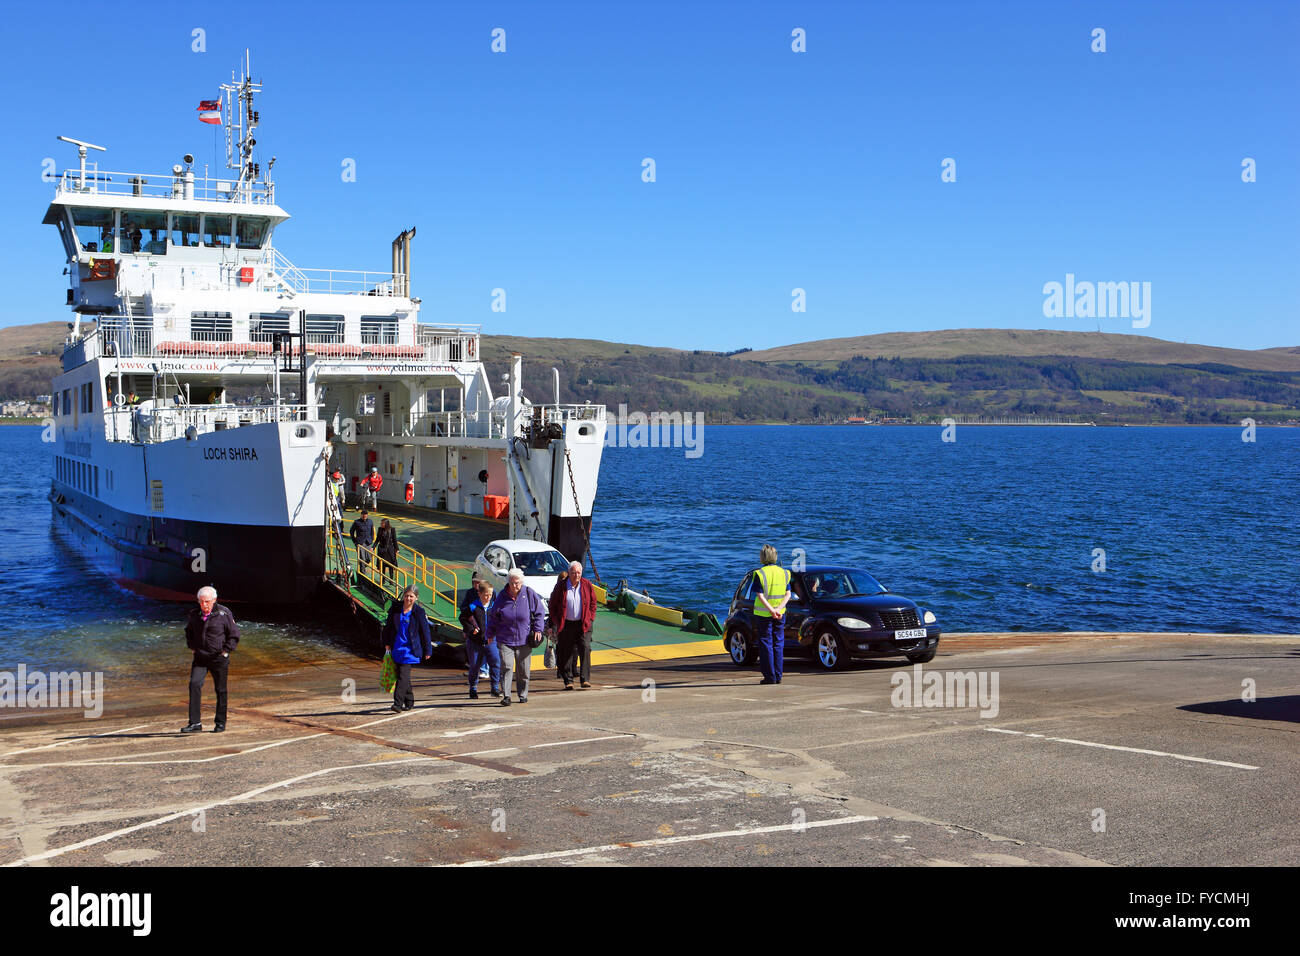 Passengers and cars disembarking on the Isle of Cumbrae from the Calmac ferry, Loch Shira, which runs between Largs and Cumbrae Stock Photo